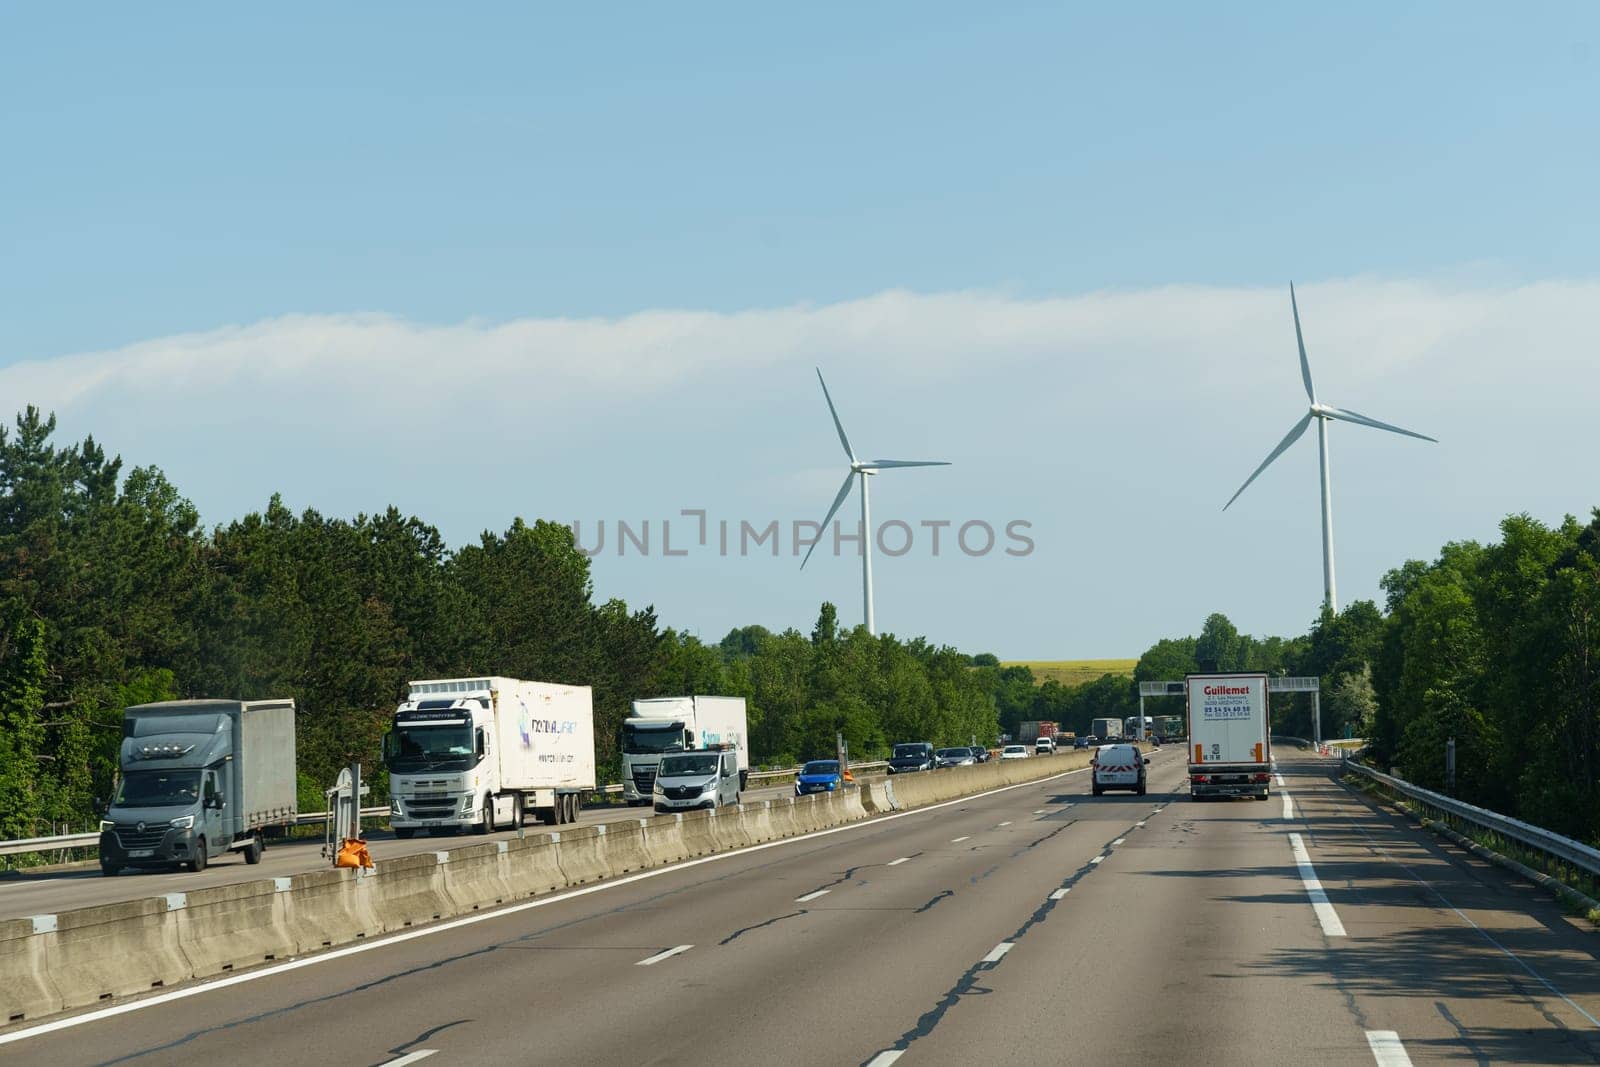 Vaugry Gard, France - May 30, 2023: A highway filled with heavy traffic running parallel to a line of towering wind turbines generating renewable energy.